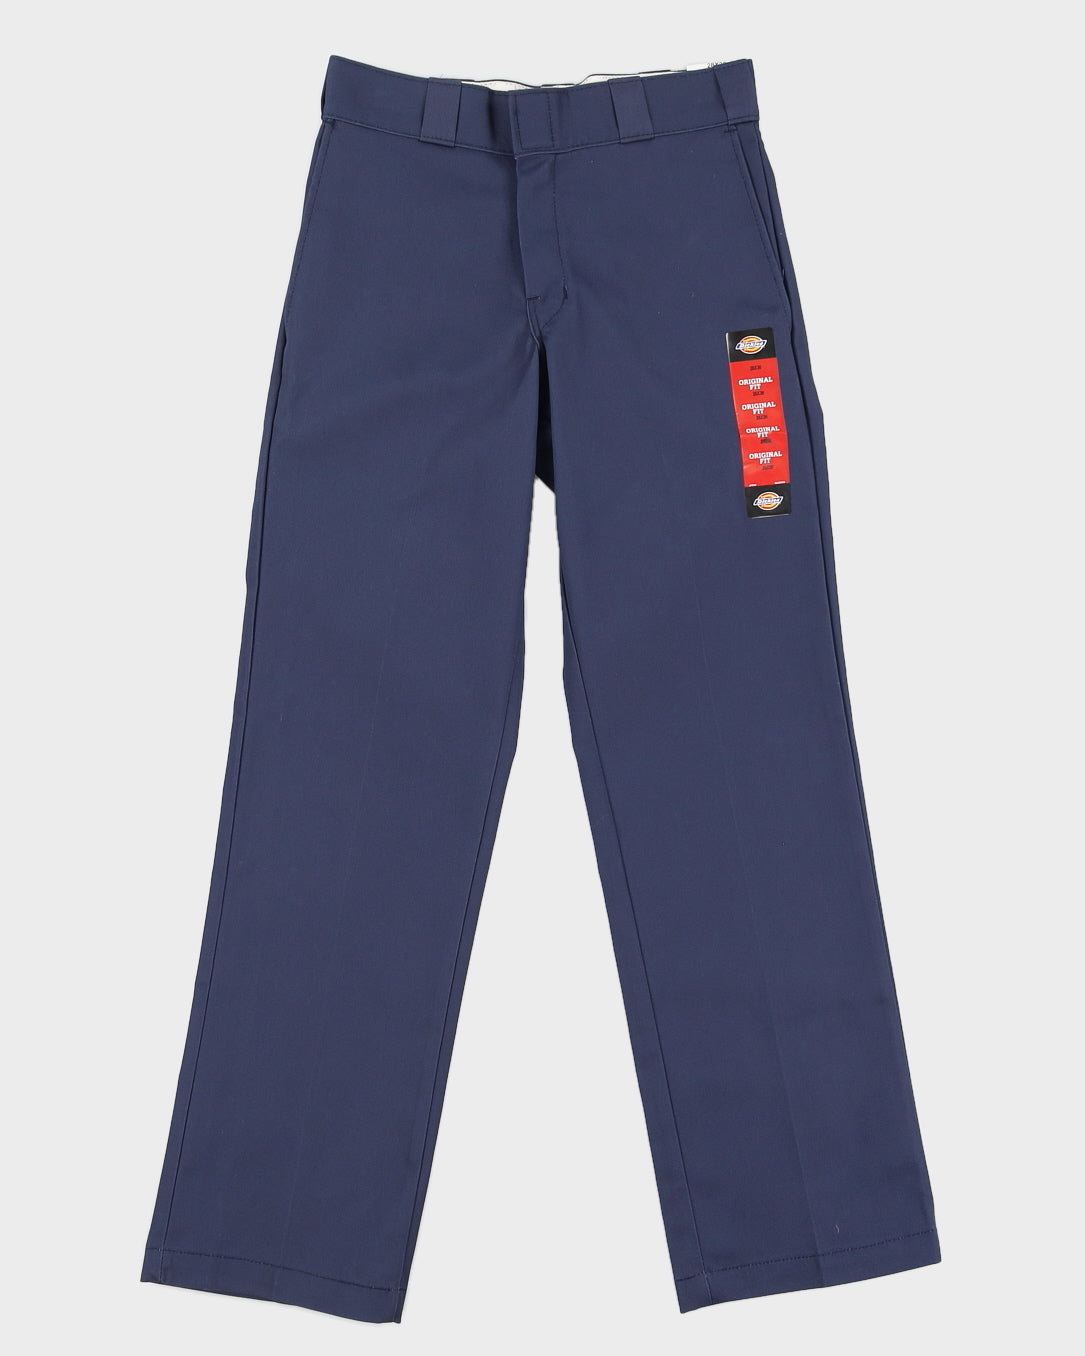 00s Dickies 874 Blue Trousers Deadstock With Tags - W28 L30